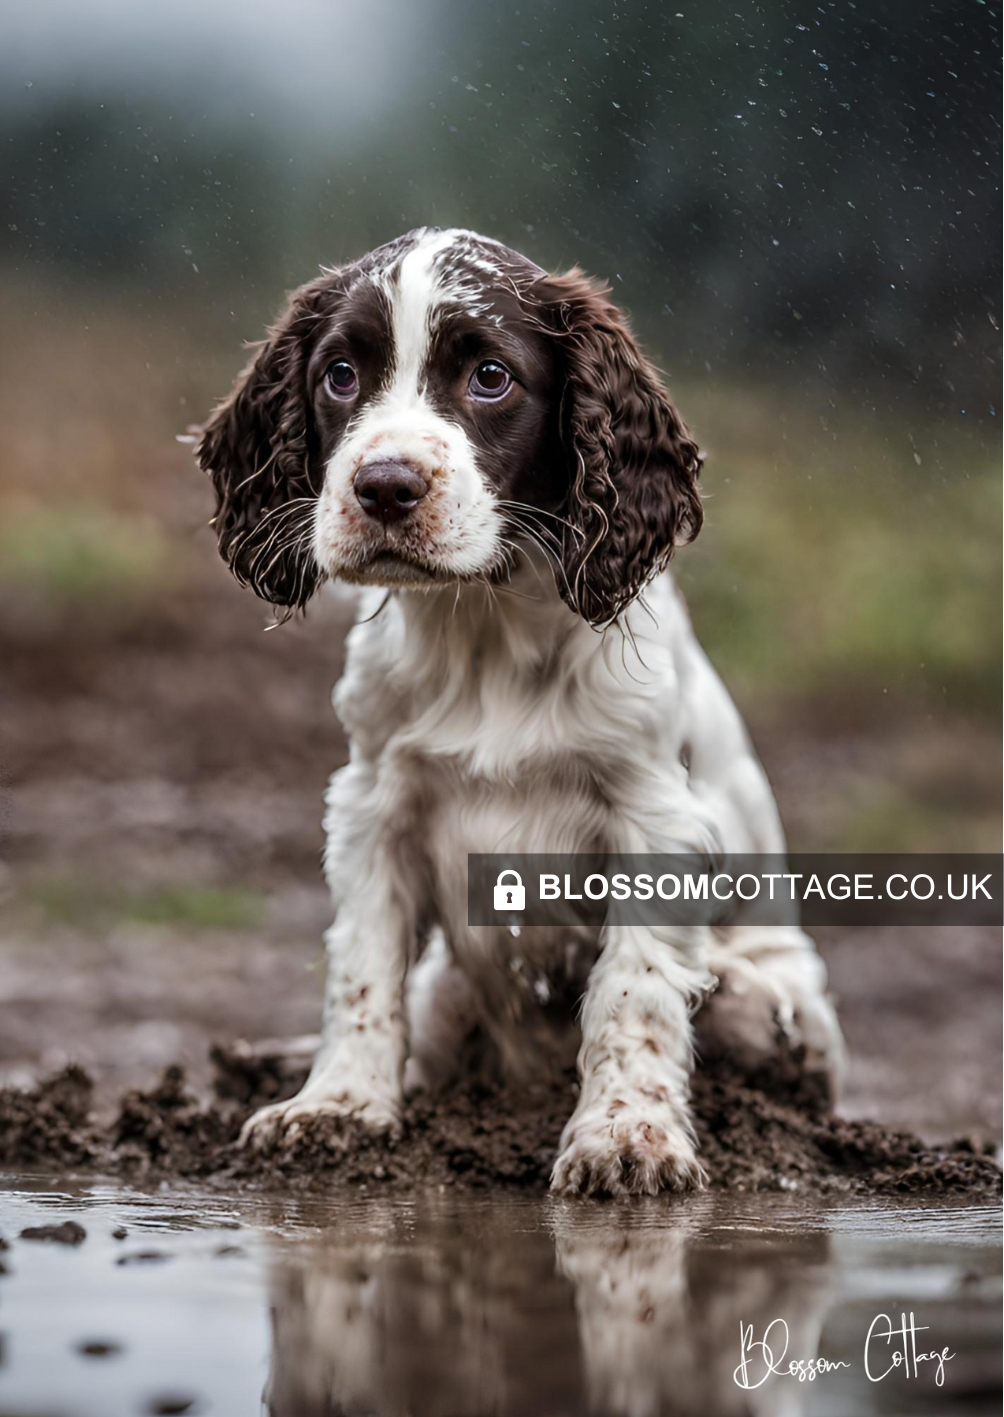 Springer Spaniel - "Muddy Paws & Waggy Tail"